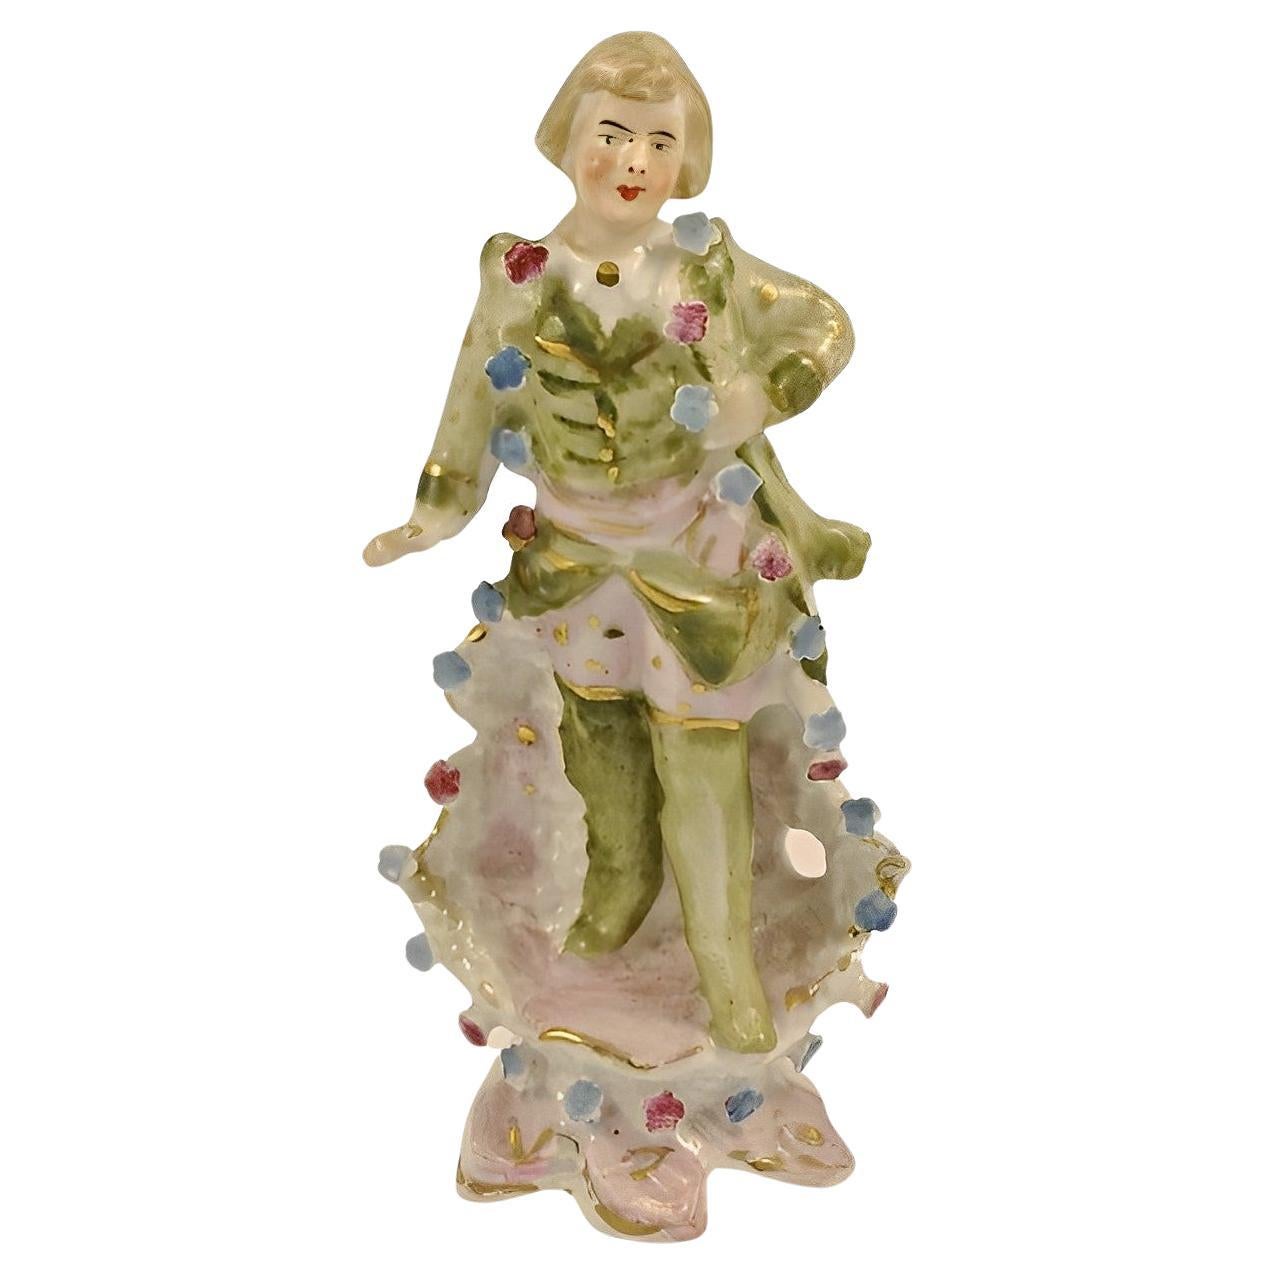 Antique Hand Painted Porcelain Man Figurine with Flowers For Sale